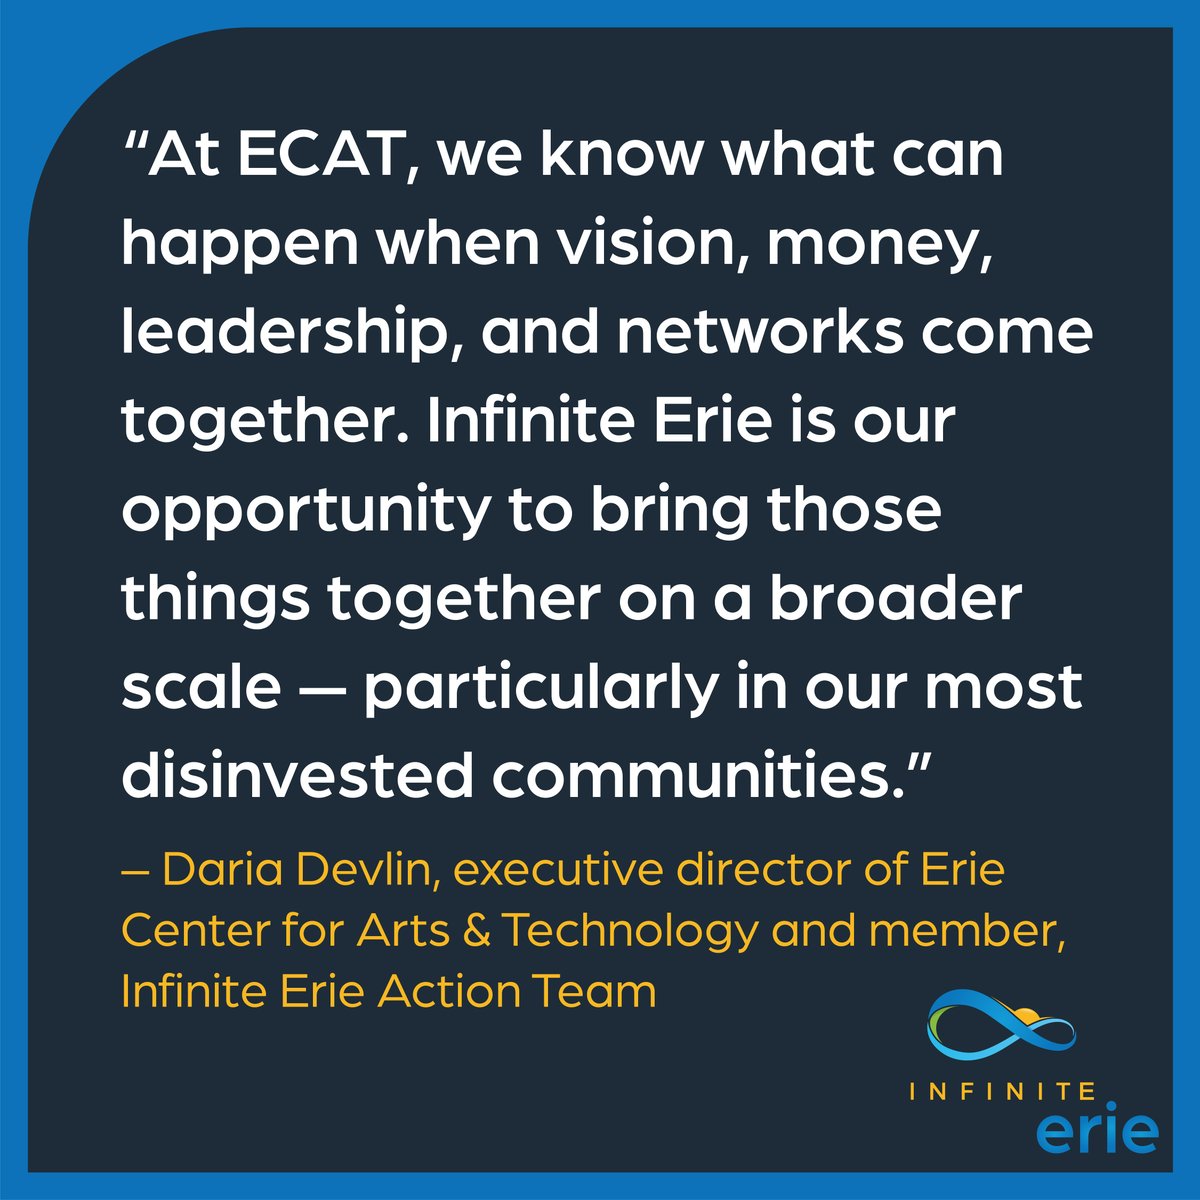 Collaboration is the key that unlocks the door to infinite possibilities, infinite growth, & infinite hope for #ErieCounty. When we are unified, great things can be accomplished — Infinite Erie is proof of that. Join us as we continue to put more plans into action.